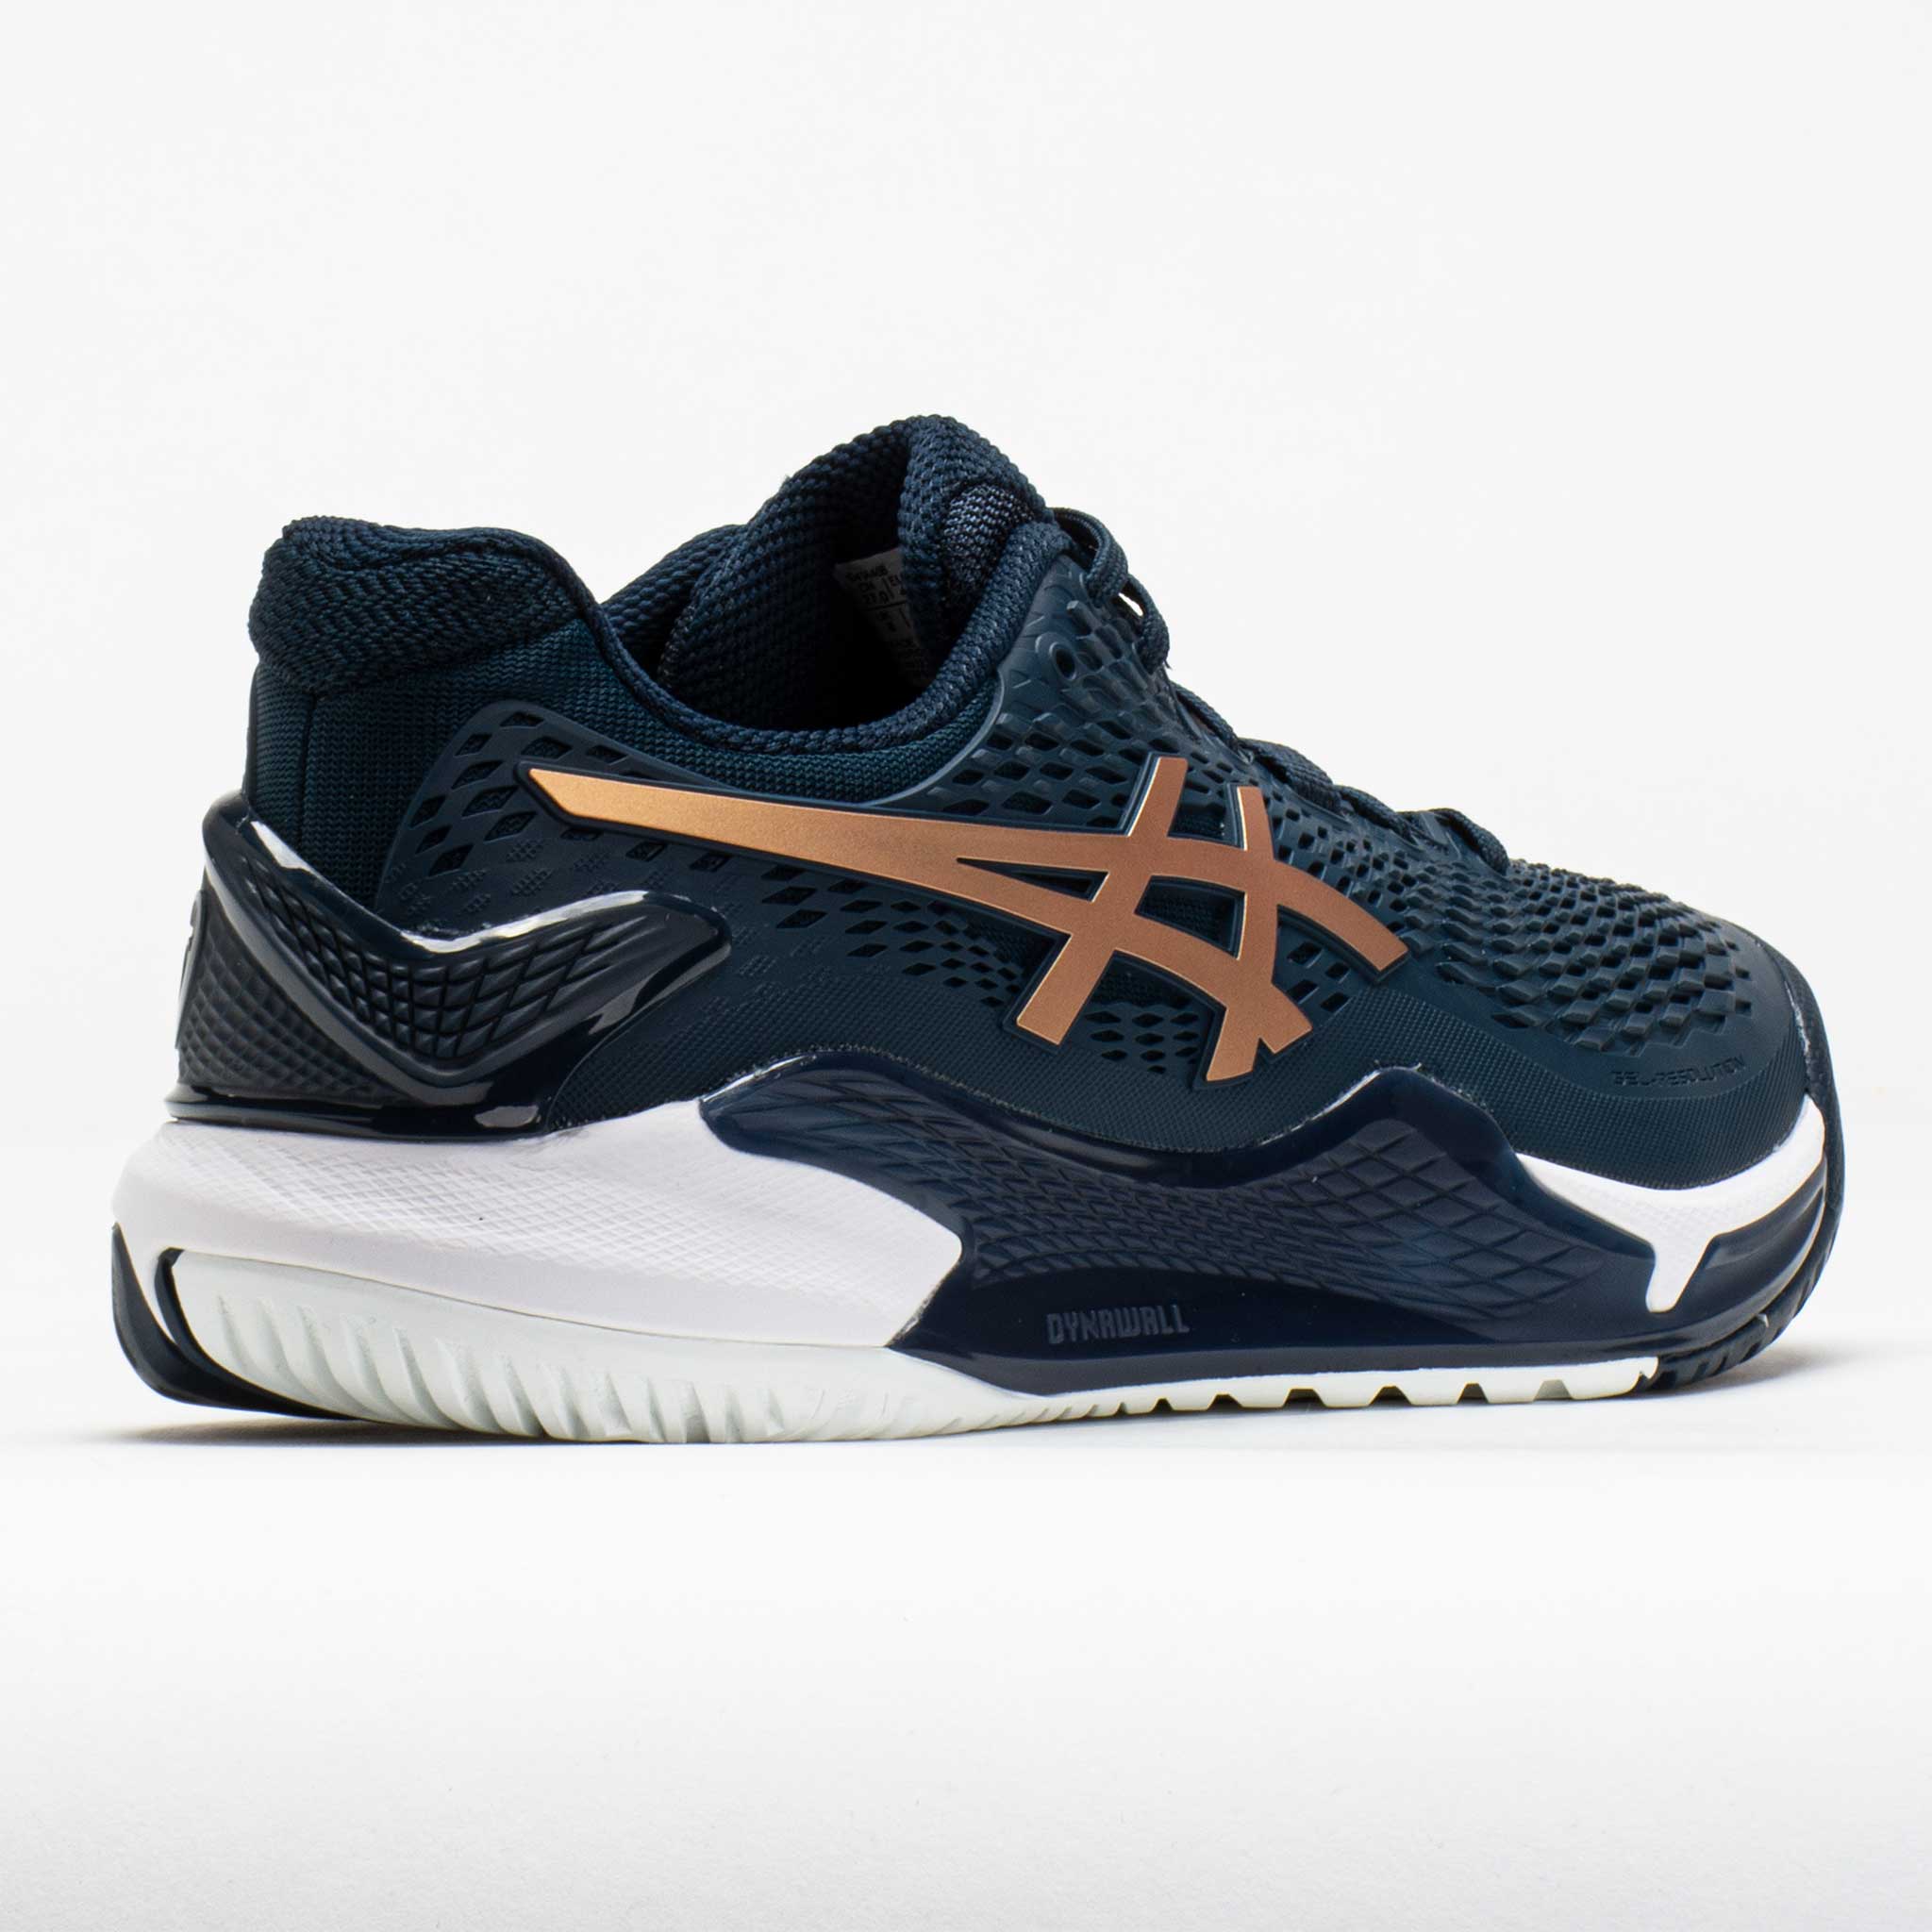 ASICS GEL-Resolution 9 Men's French Blue/Pure Gold